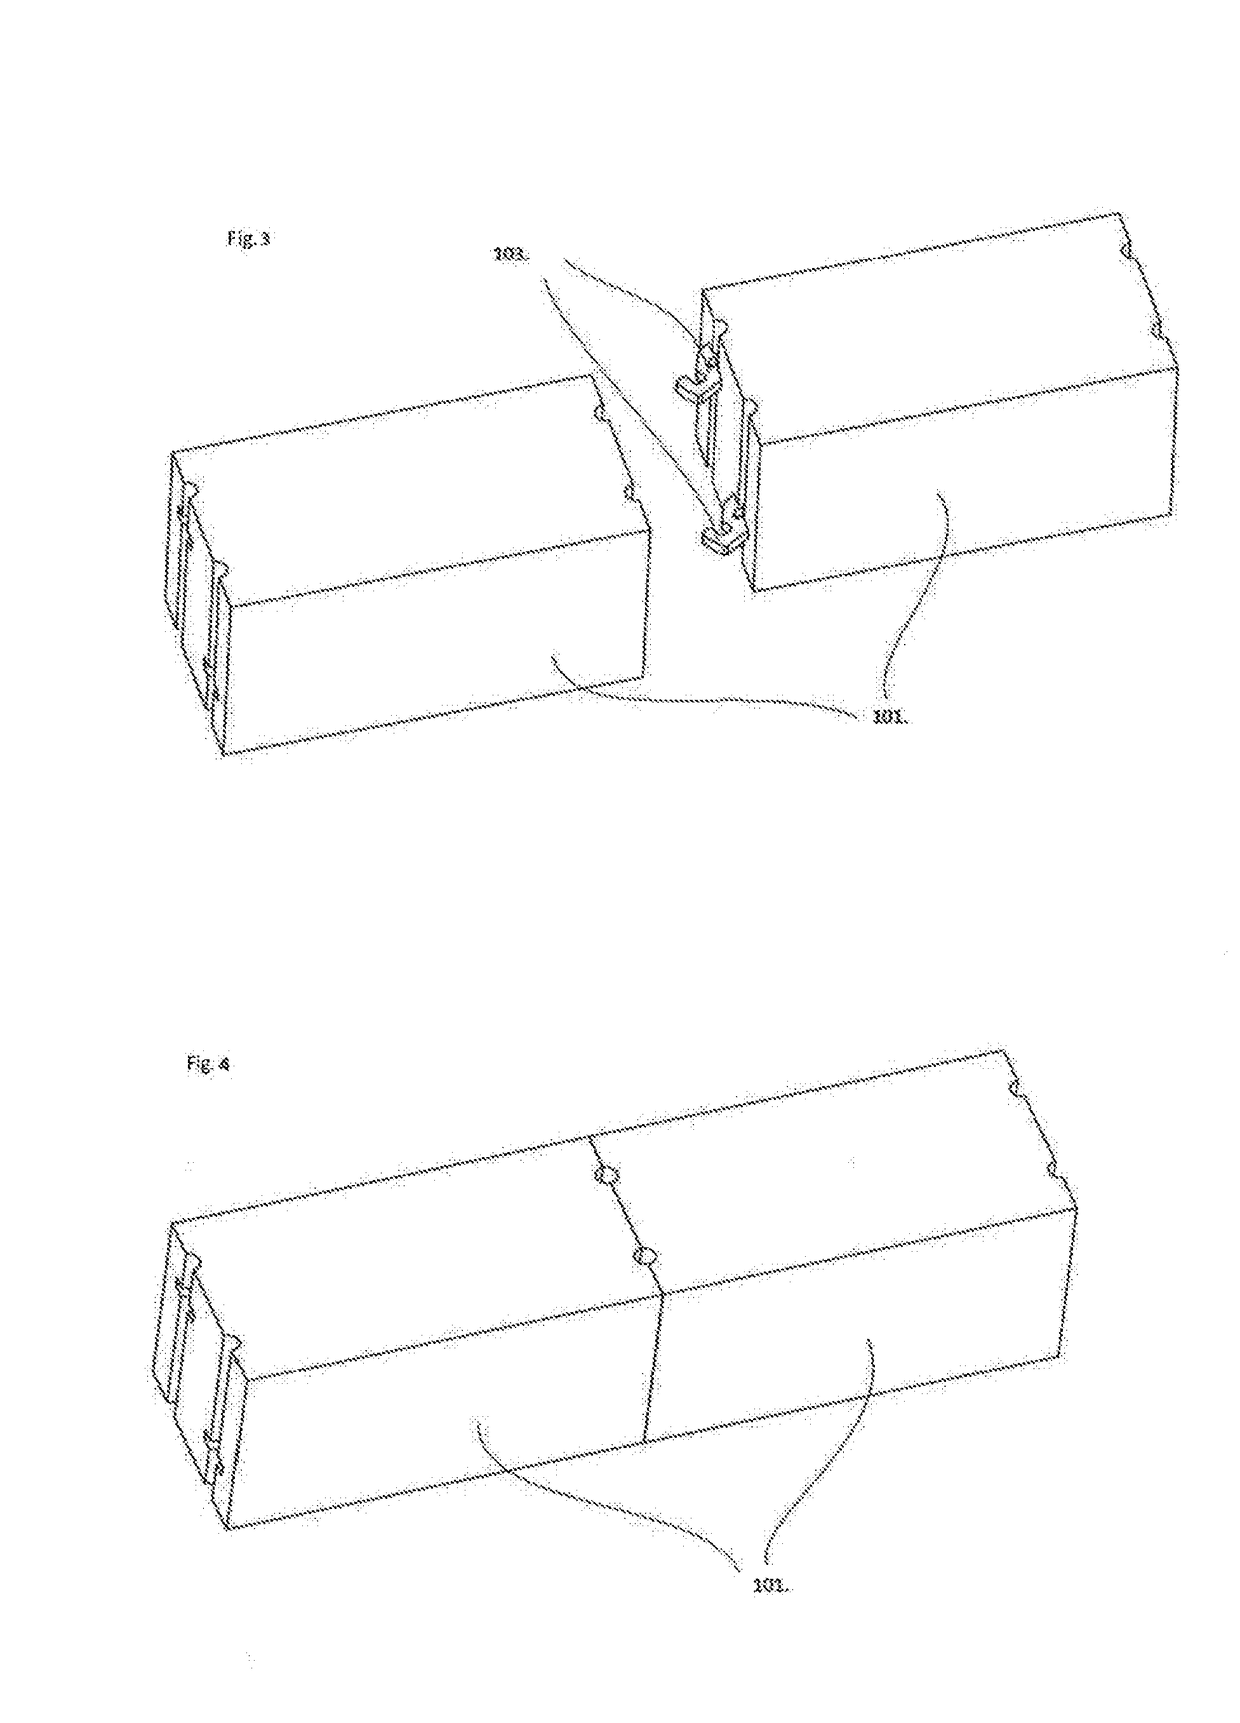 Modular furniture arrangement comprising electrically and mechanically connectable module furniture parts